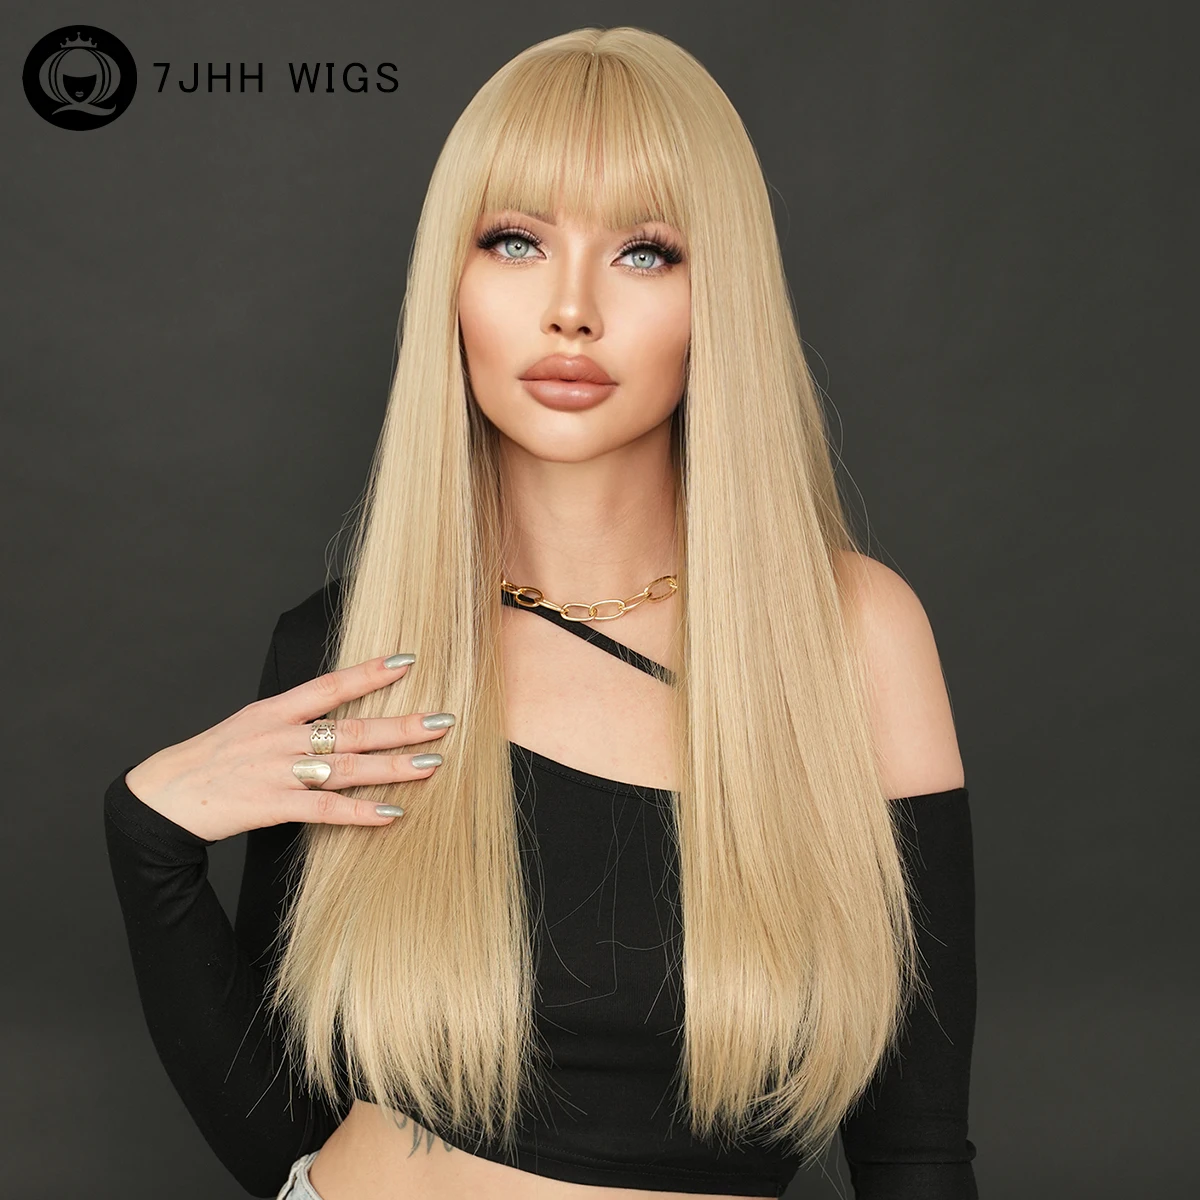 7JHH WIGS Synthetic Long Straight Blonde Wigs with Neat Bangs High Density Heat Resistant Champagne Hair Wigs for Women Daily